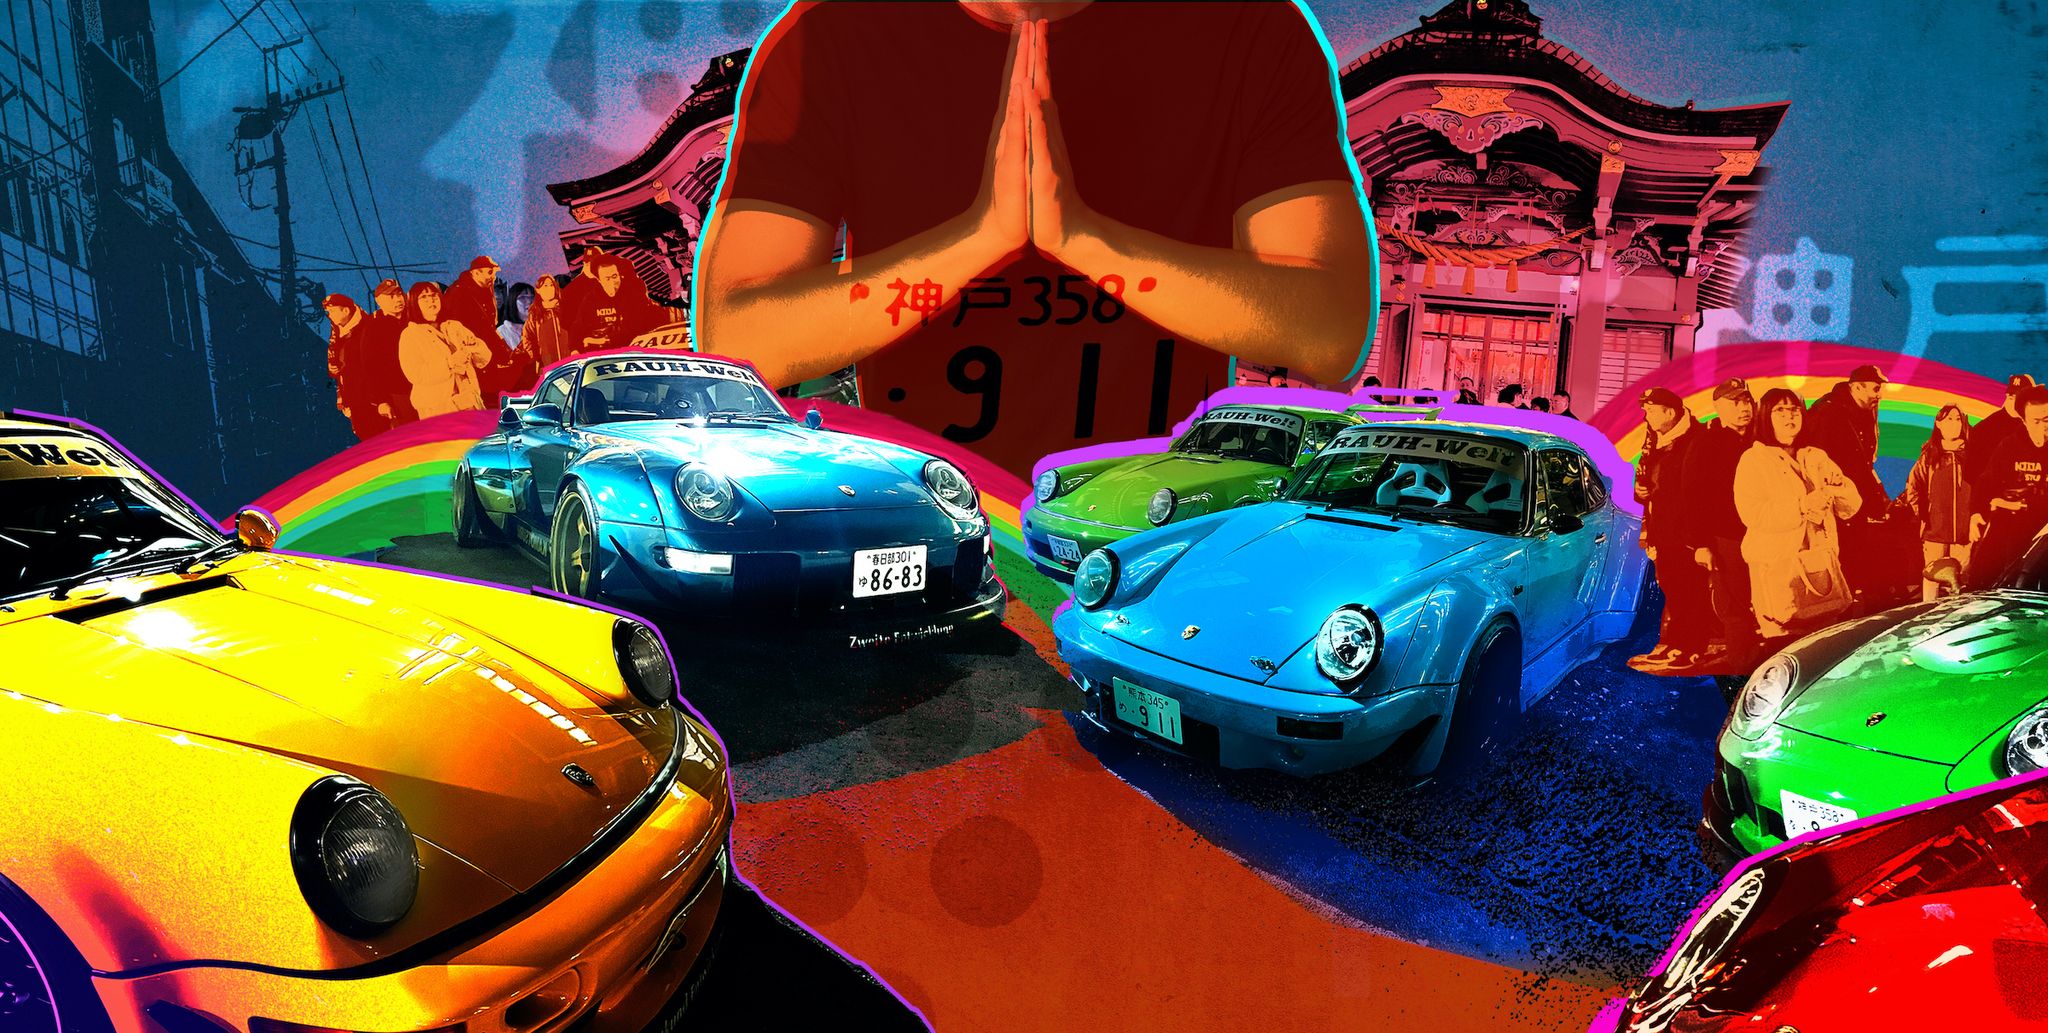 RWB's New Year's Celebration Is Proof Japanese Car Culture Is on Another Level